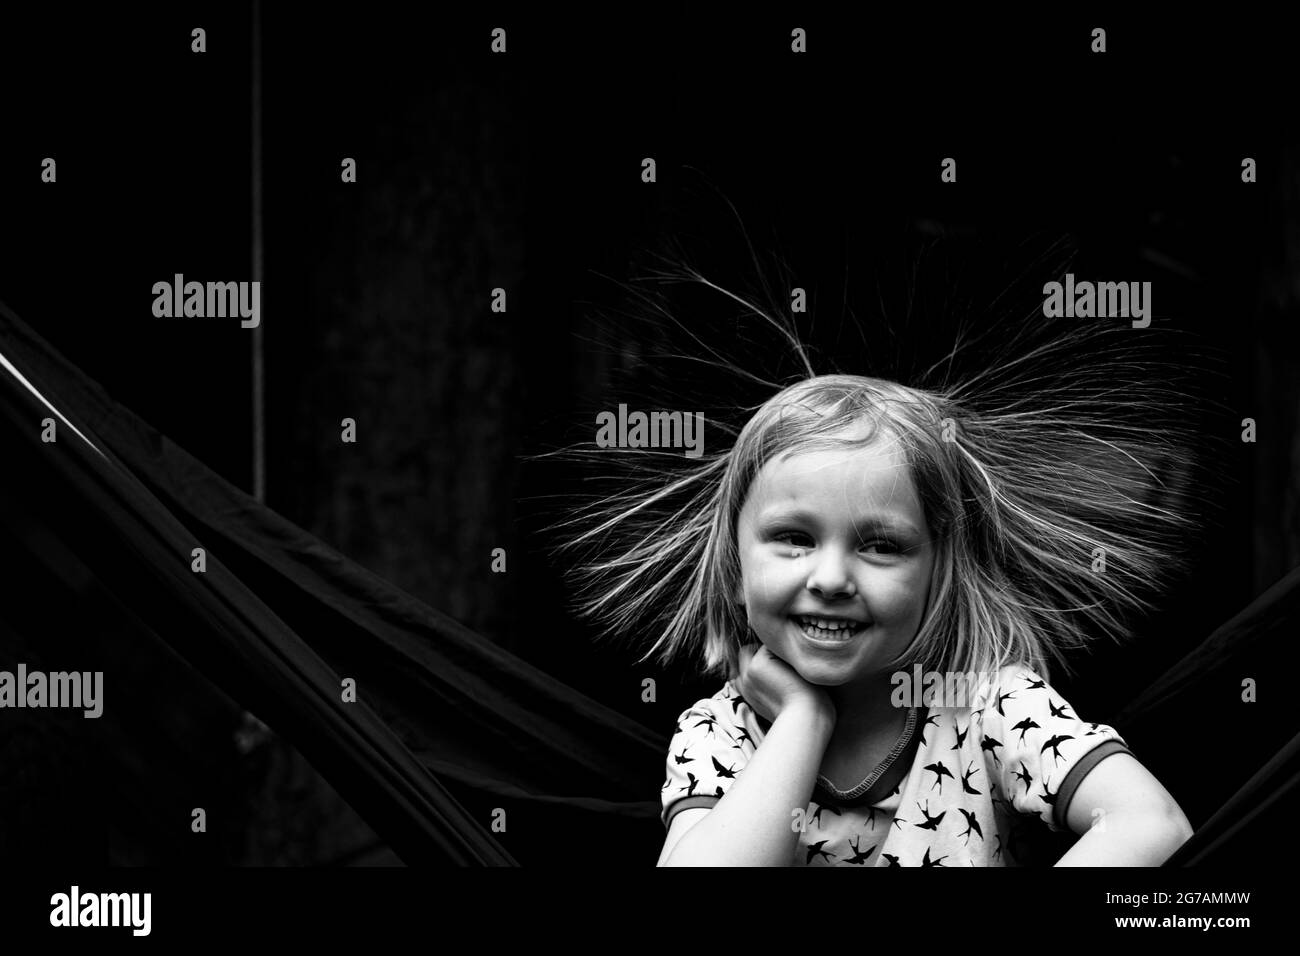 Blond girl with static hair Stock Photo